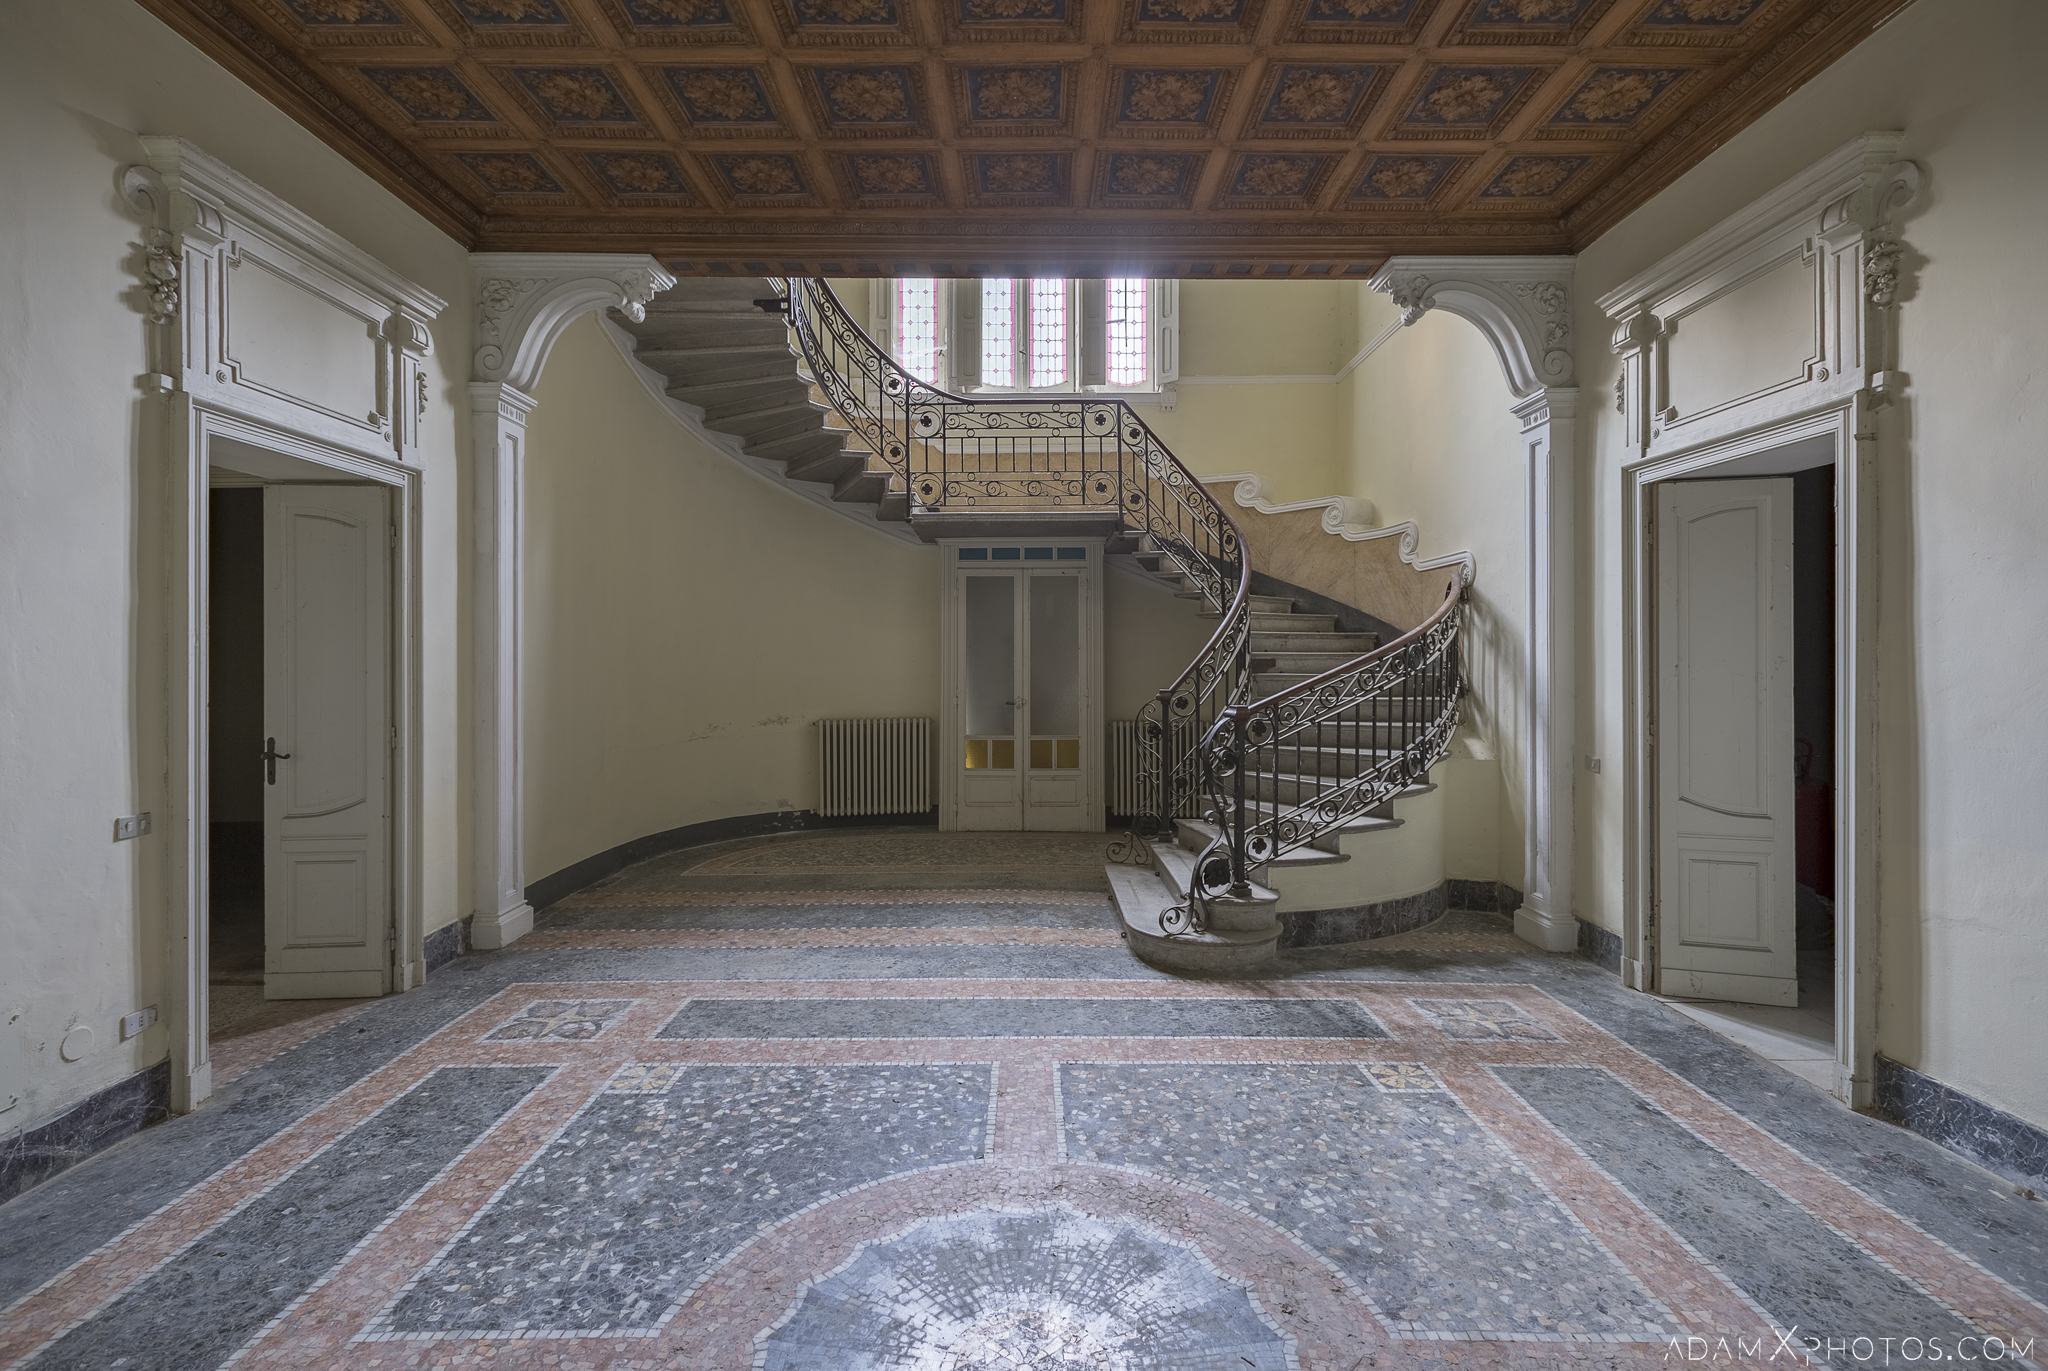 Hallway entrance grand stairs staircase ornate ceiling tiles tiled floor Villa Margherita Night Camping Urbex Adam X Urban Exploration Italy Italia Access 2016 Abandoned decay lost forgotten derelict location creepy haunting eerie